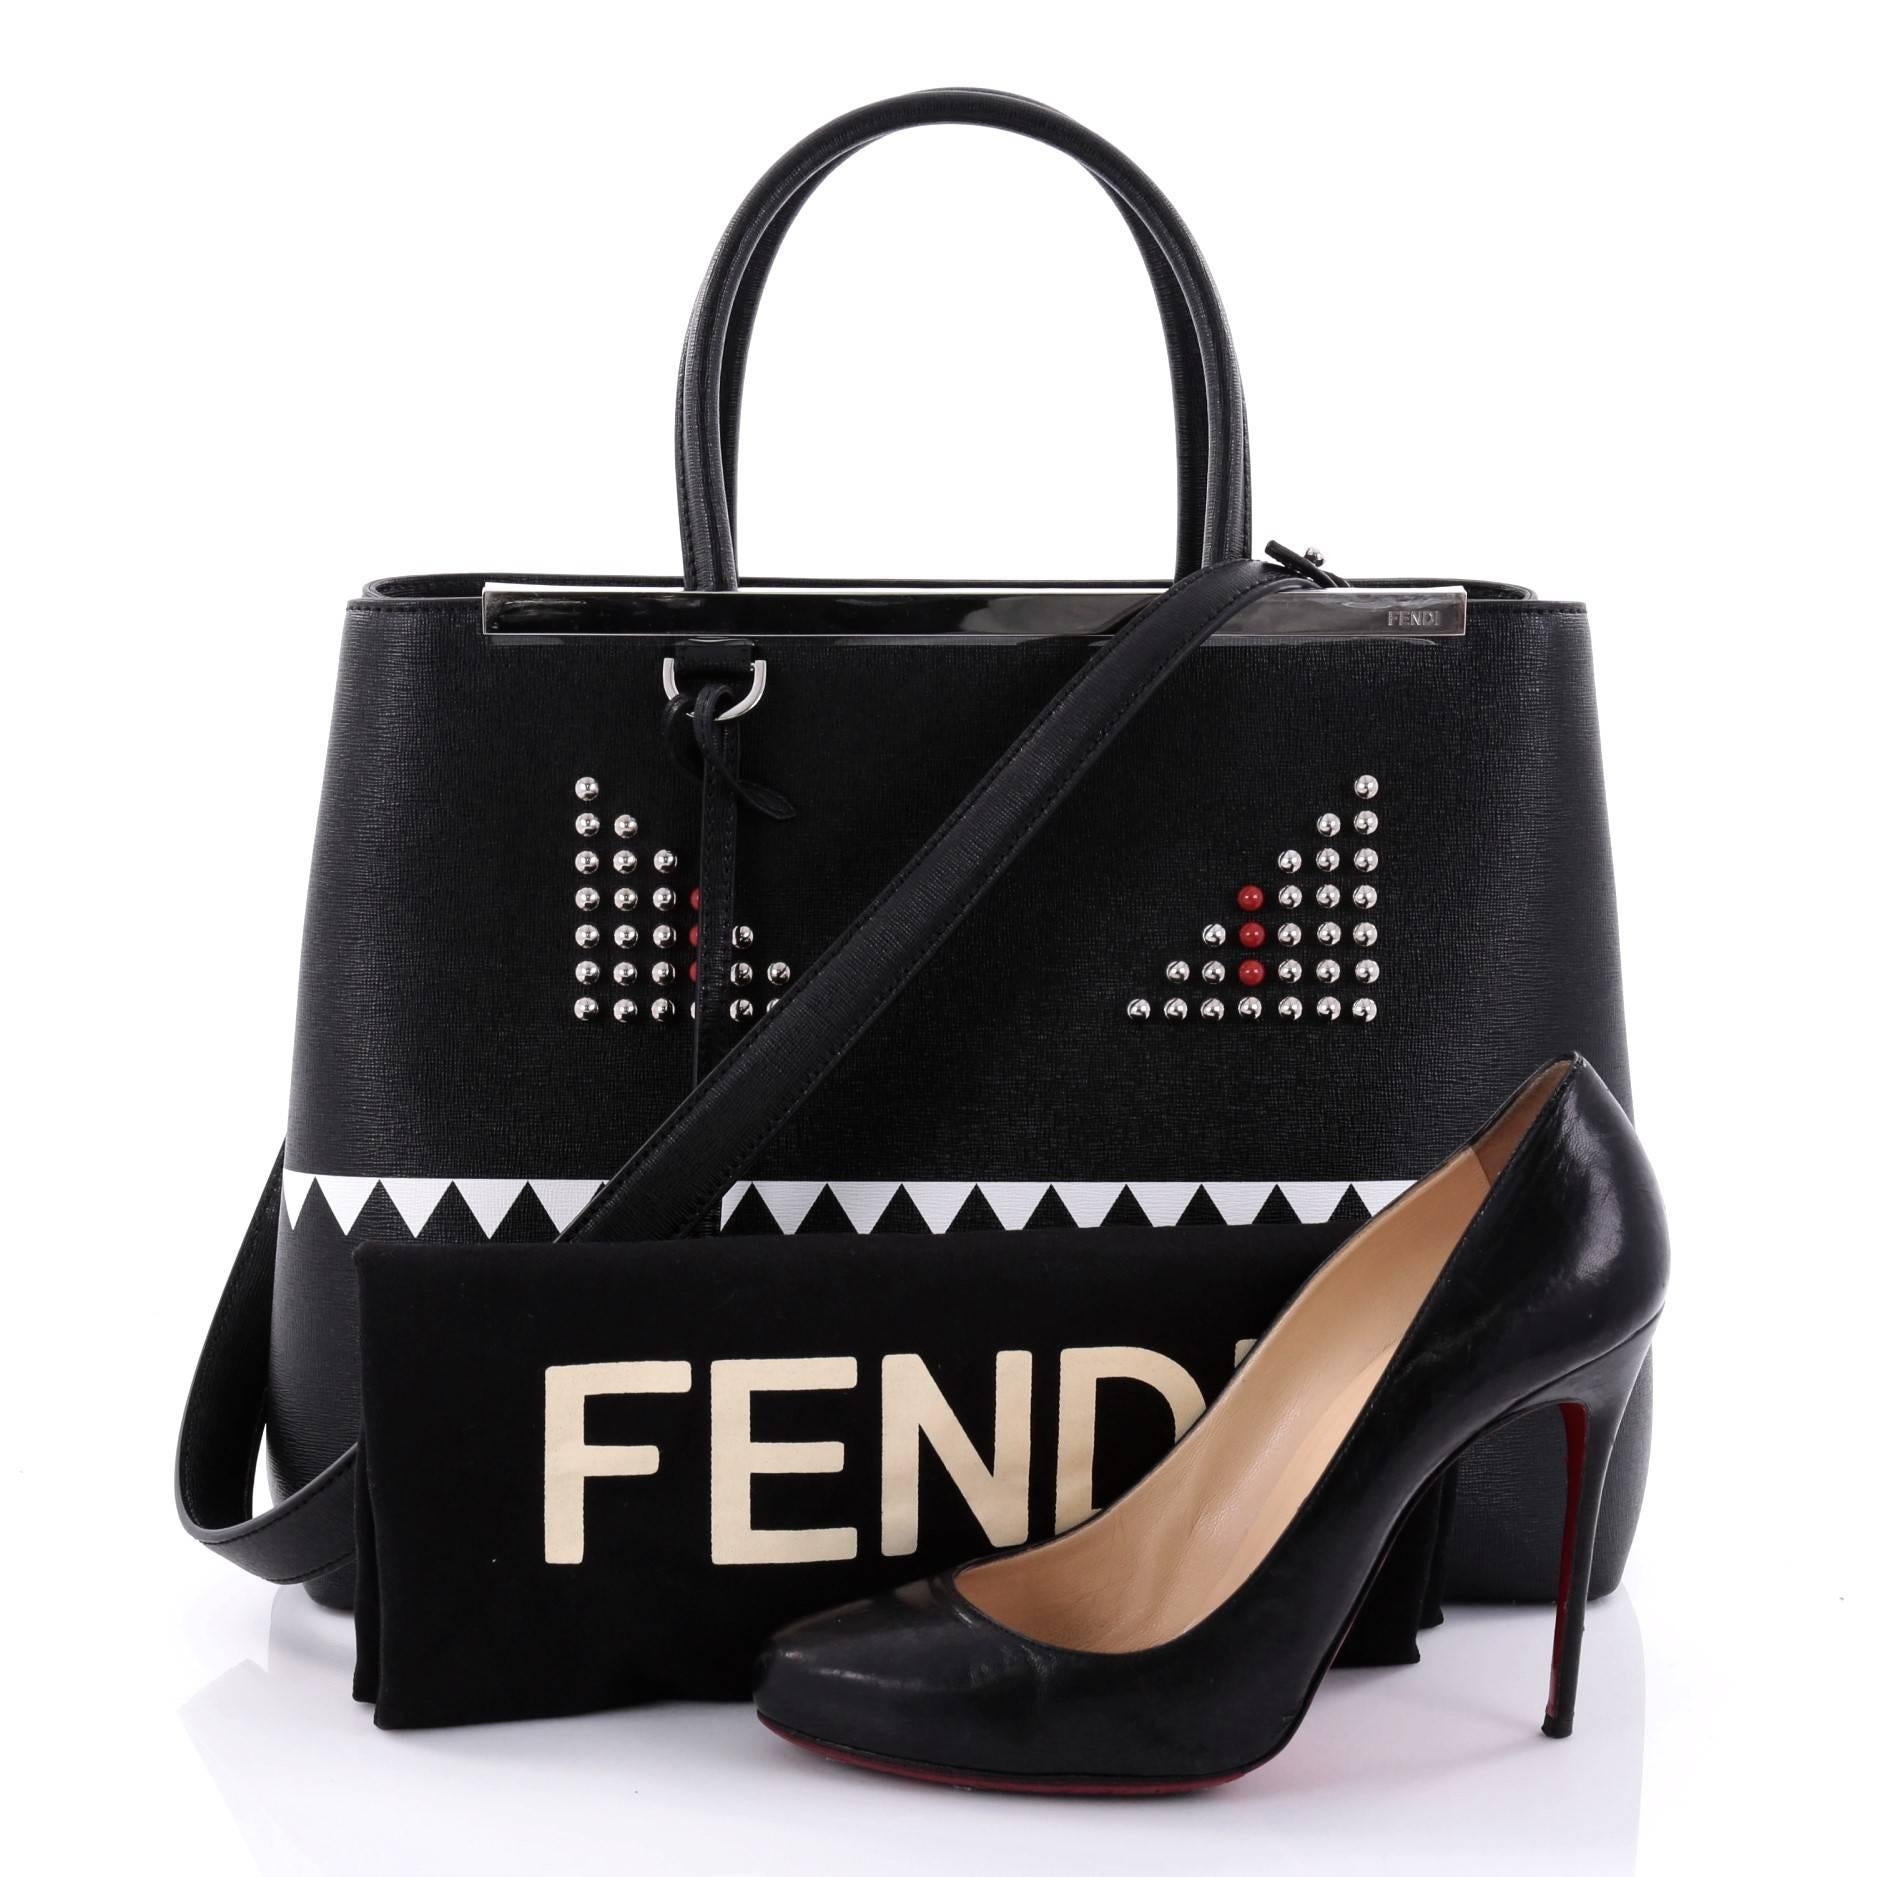 This authentic Fendi 2Jours Monster Handbag Leather Medium is a popular design that is impeccably stylish with its simple silhouette. Crafted from black leather, this structured tote features dual-rolled leather handles, a shining top bar with Fendi